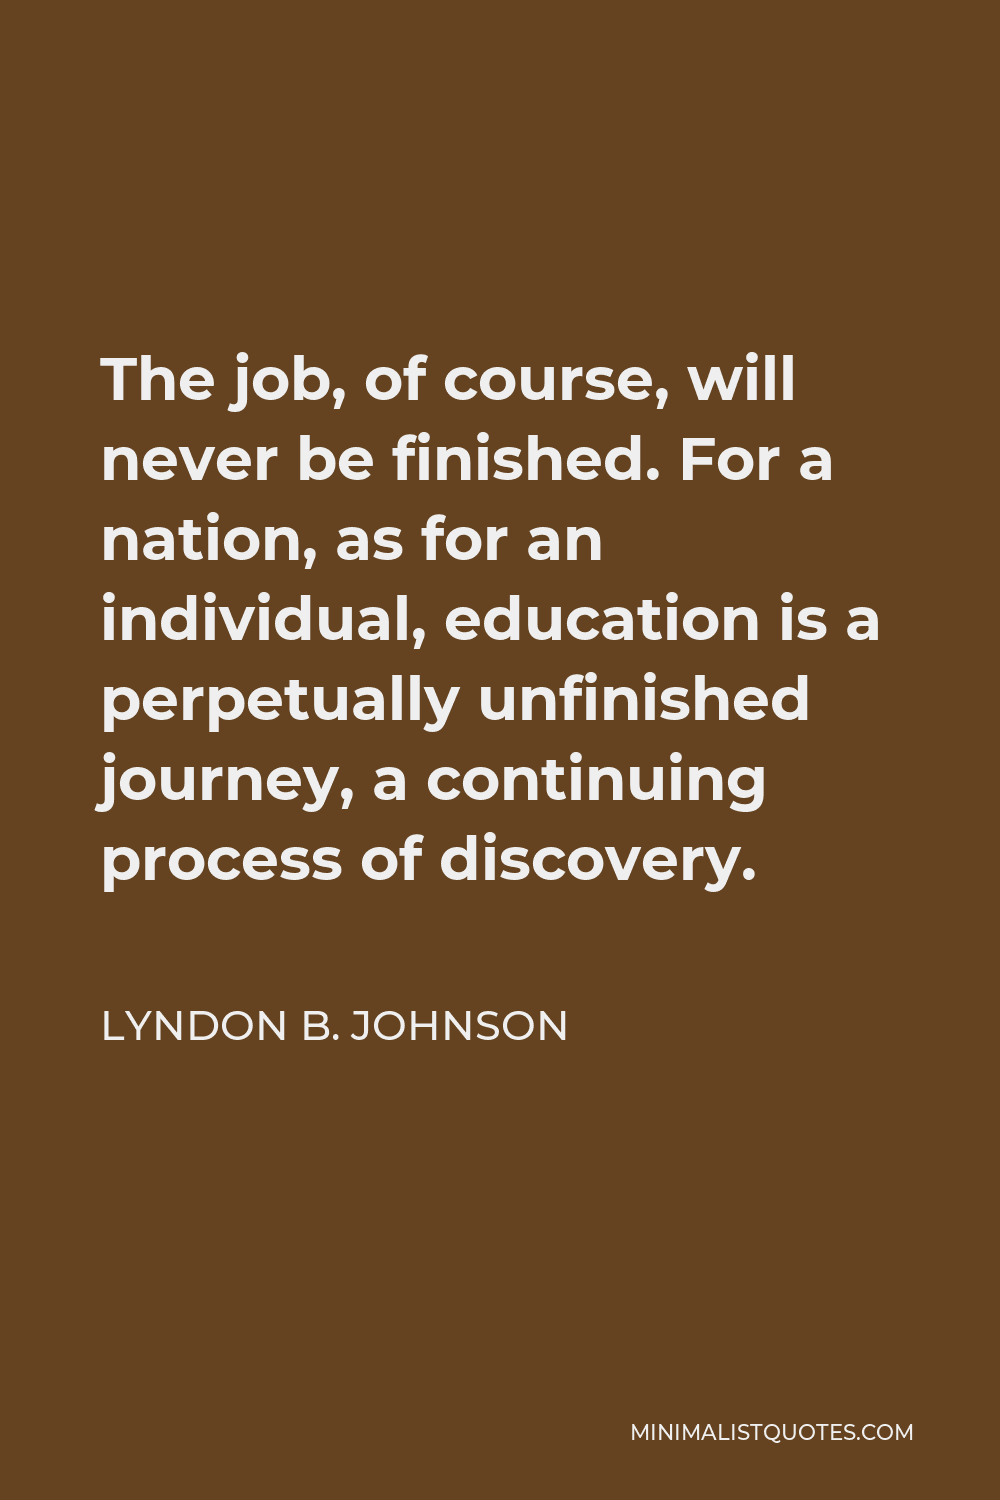 Lyndon B. Johnson Quote - The job, of course, will never be finished. For a nation, as for an individual, education is a perpetually unfinished journey, a continuing process of discovery.